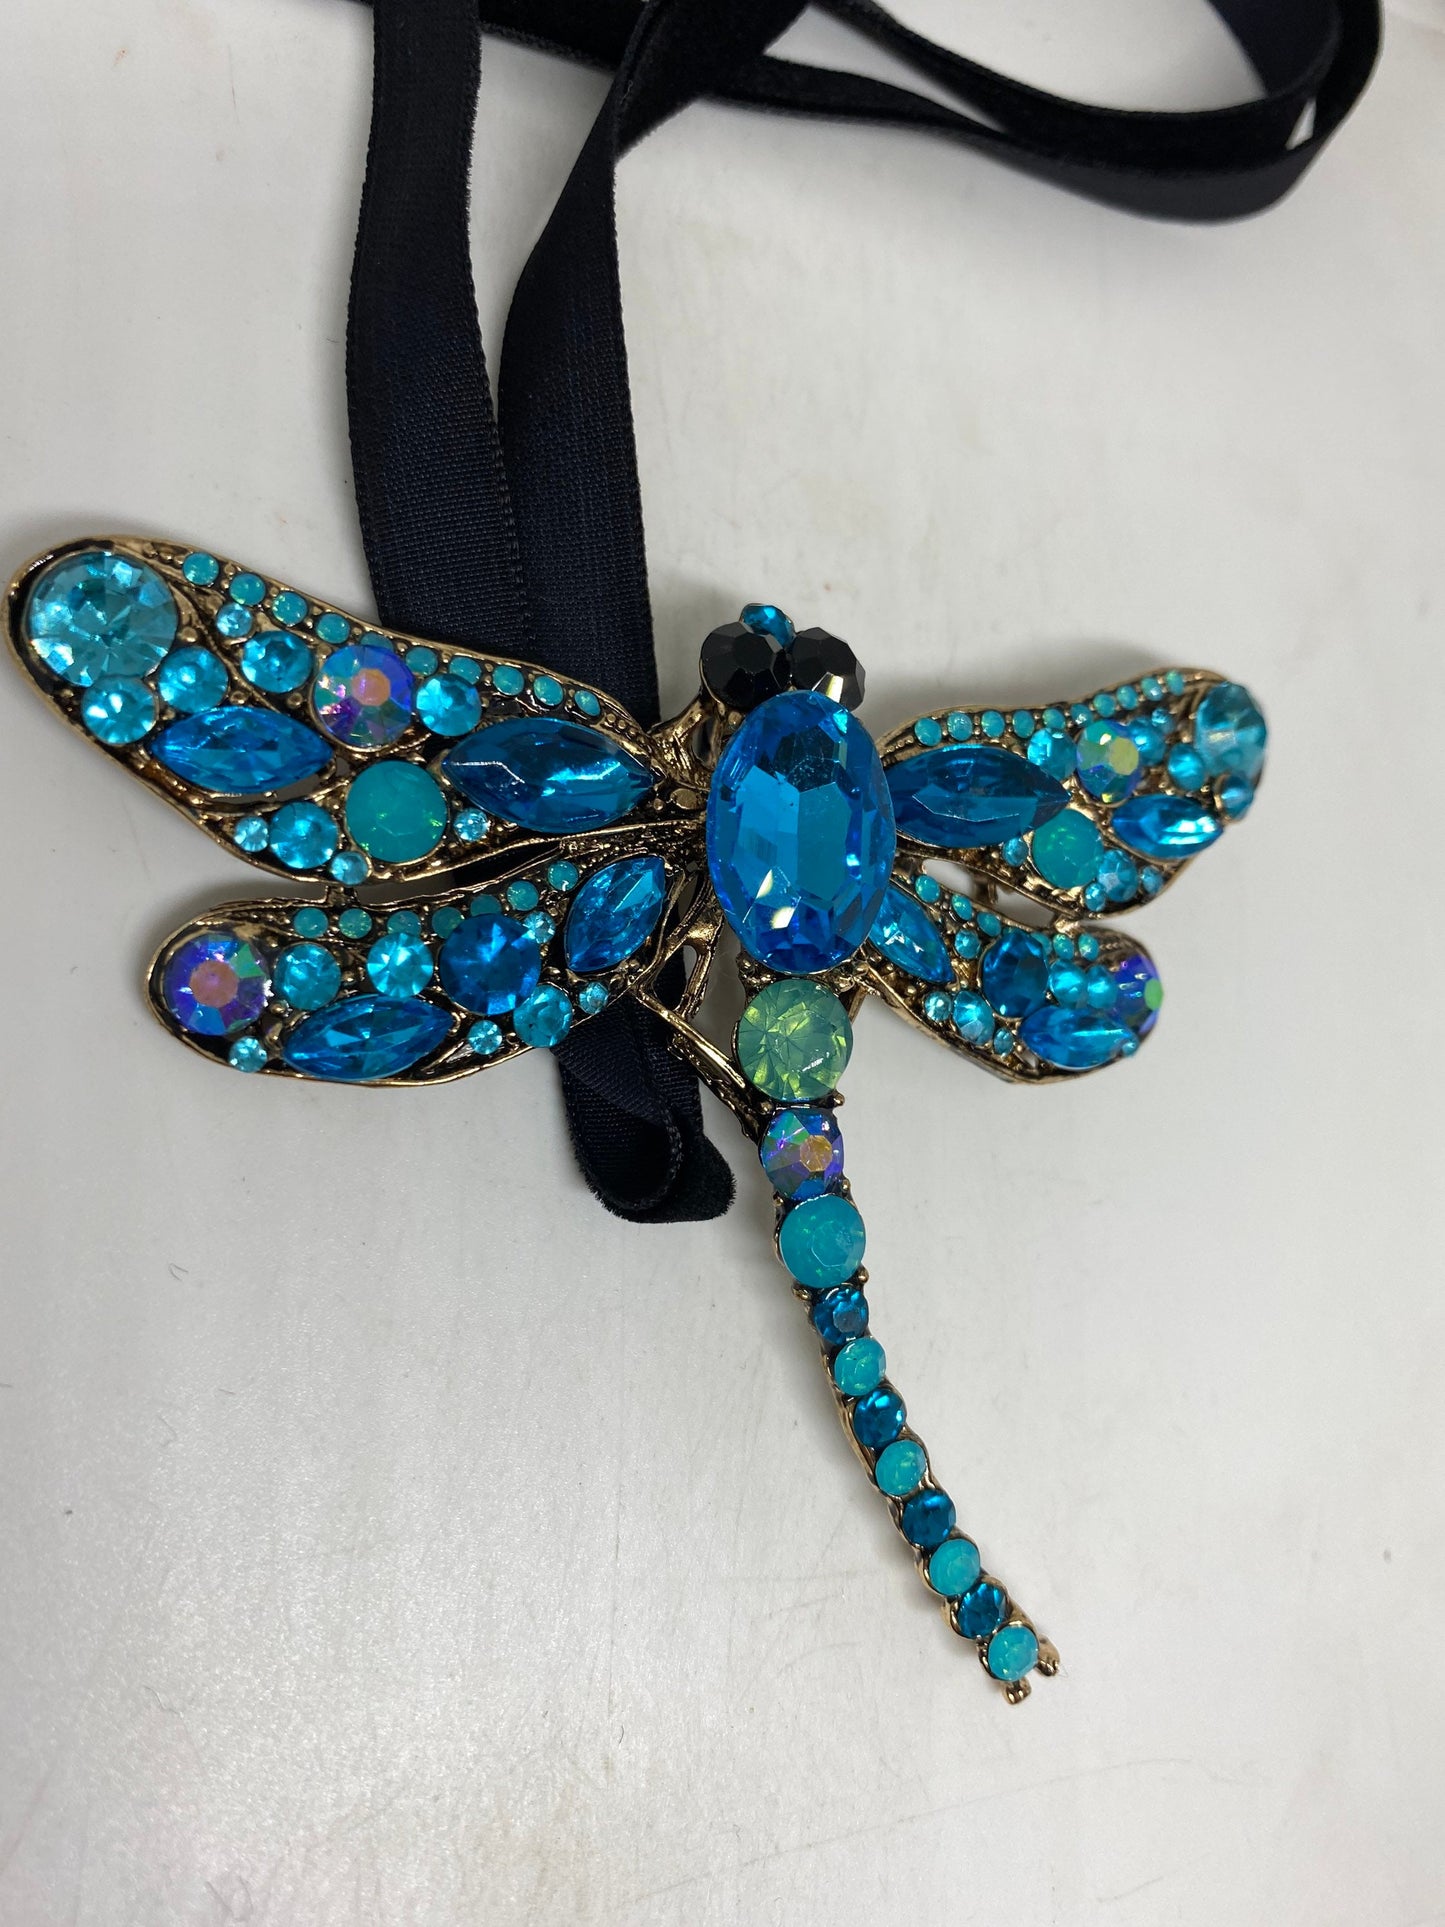 Blue Gothic Styled Austrian Crystal Dragonfly Choker Necklace pin